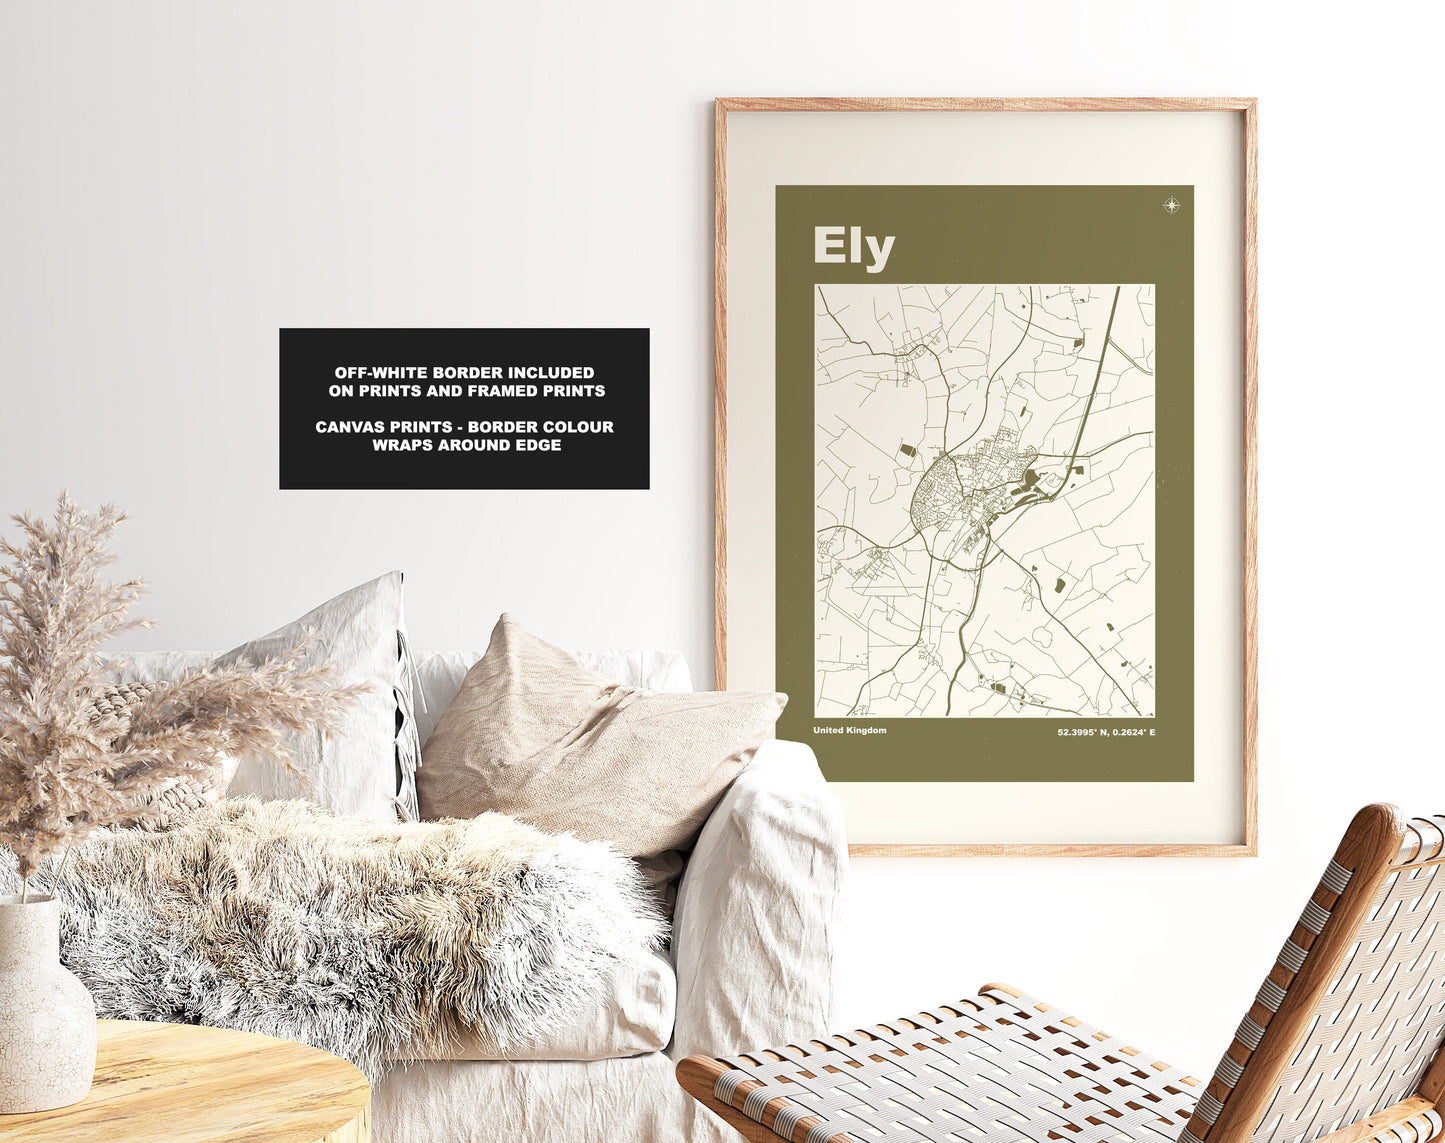 Ely Print - Map Print - Mid Century Modern  - Retro - Vintage - Contemporary - Ely Print  - Map Poster - Gift - Cambridgeshire